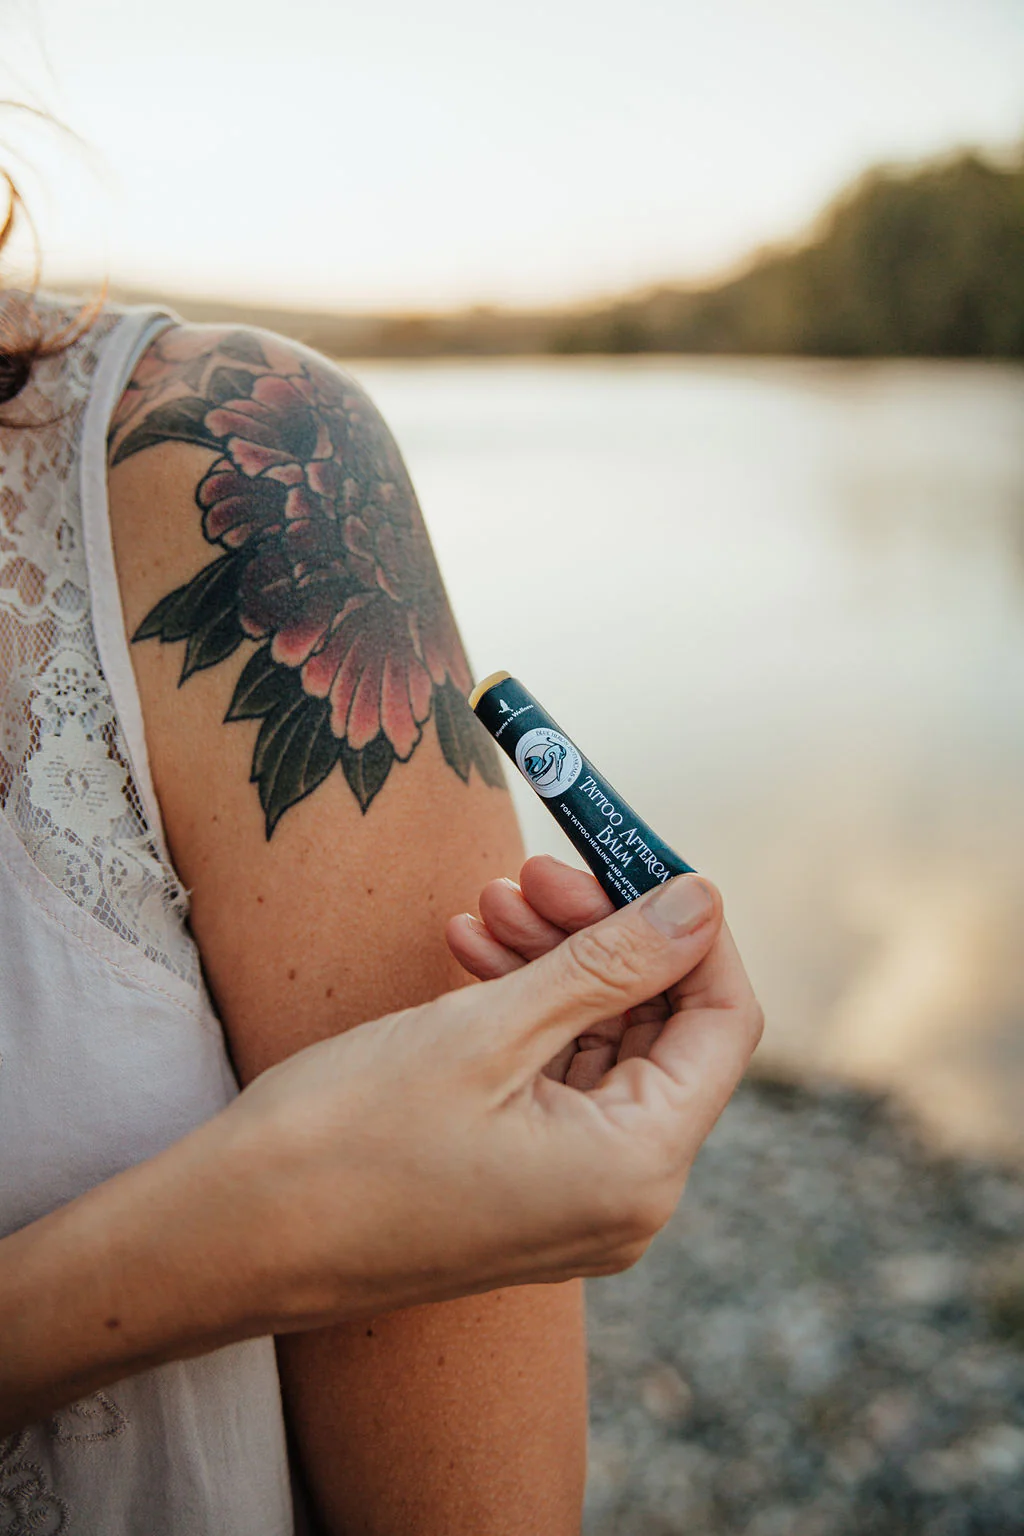 The Ultimate Guide to Organic Tattoo Aftercare + The Best Tattoo Cream